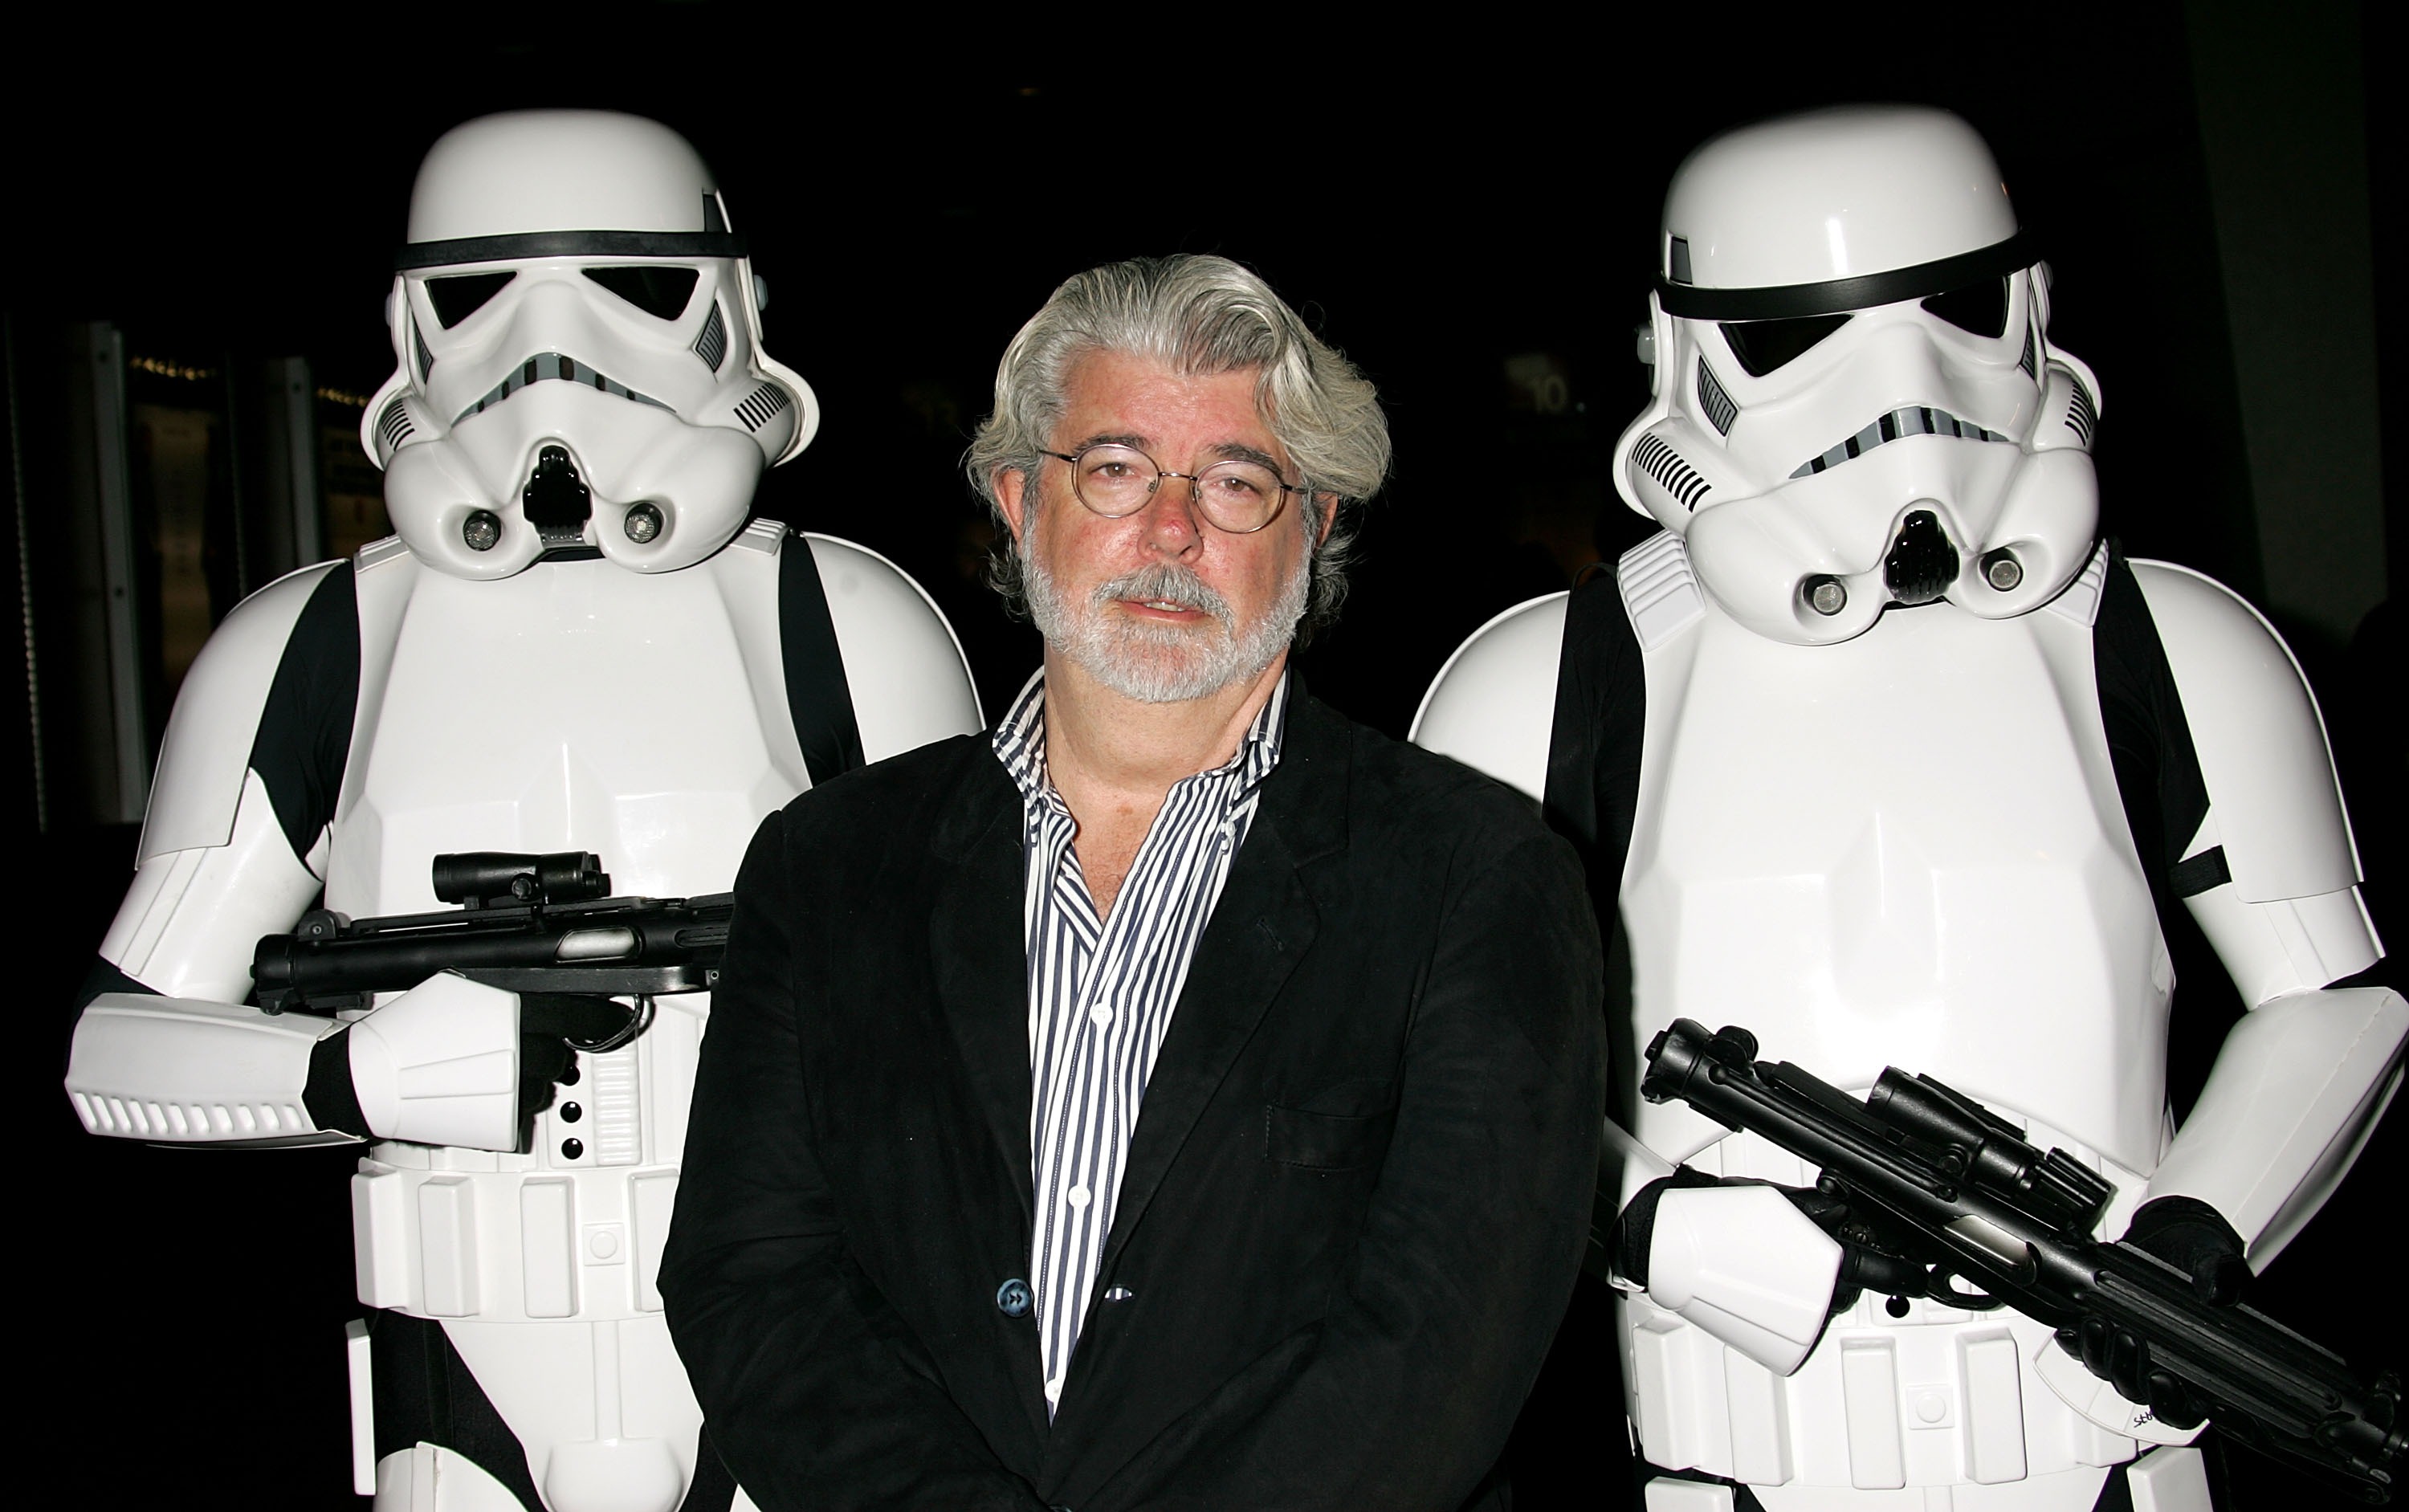 HOLLYWOOD - OCTOBER 03: ***EXCLUSIVE ACCESS*** Director George Lucas presents the film "Star Wars - Episode IV: A New Hope" at AFI's 40th Anniversary celebration presented by Target held at Arclight Cinemas on October 3, 2007 in Hollywood, California. 